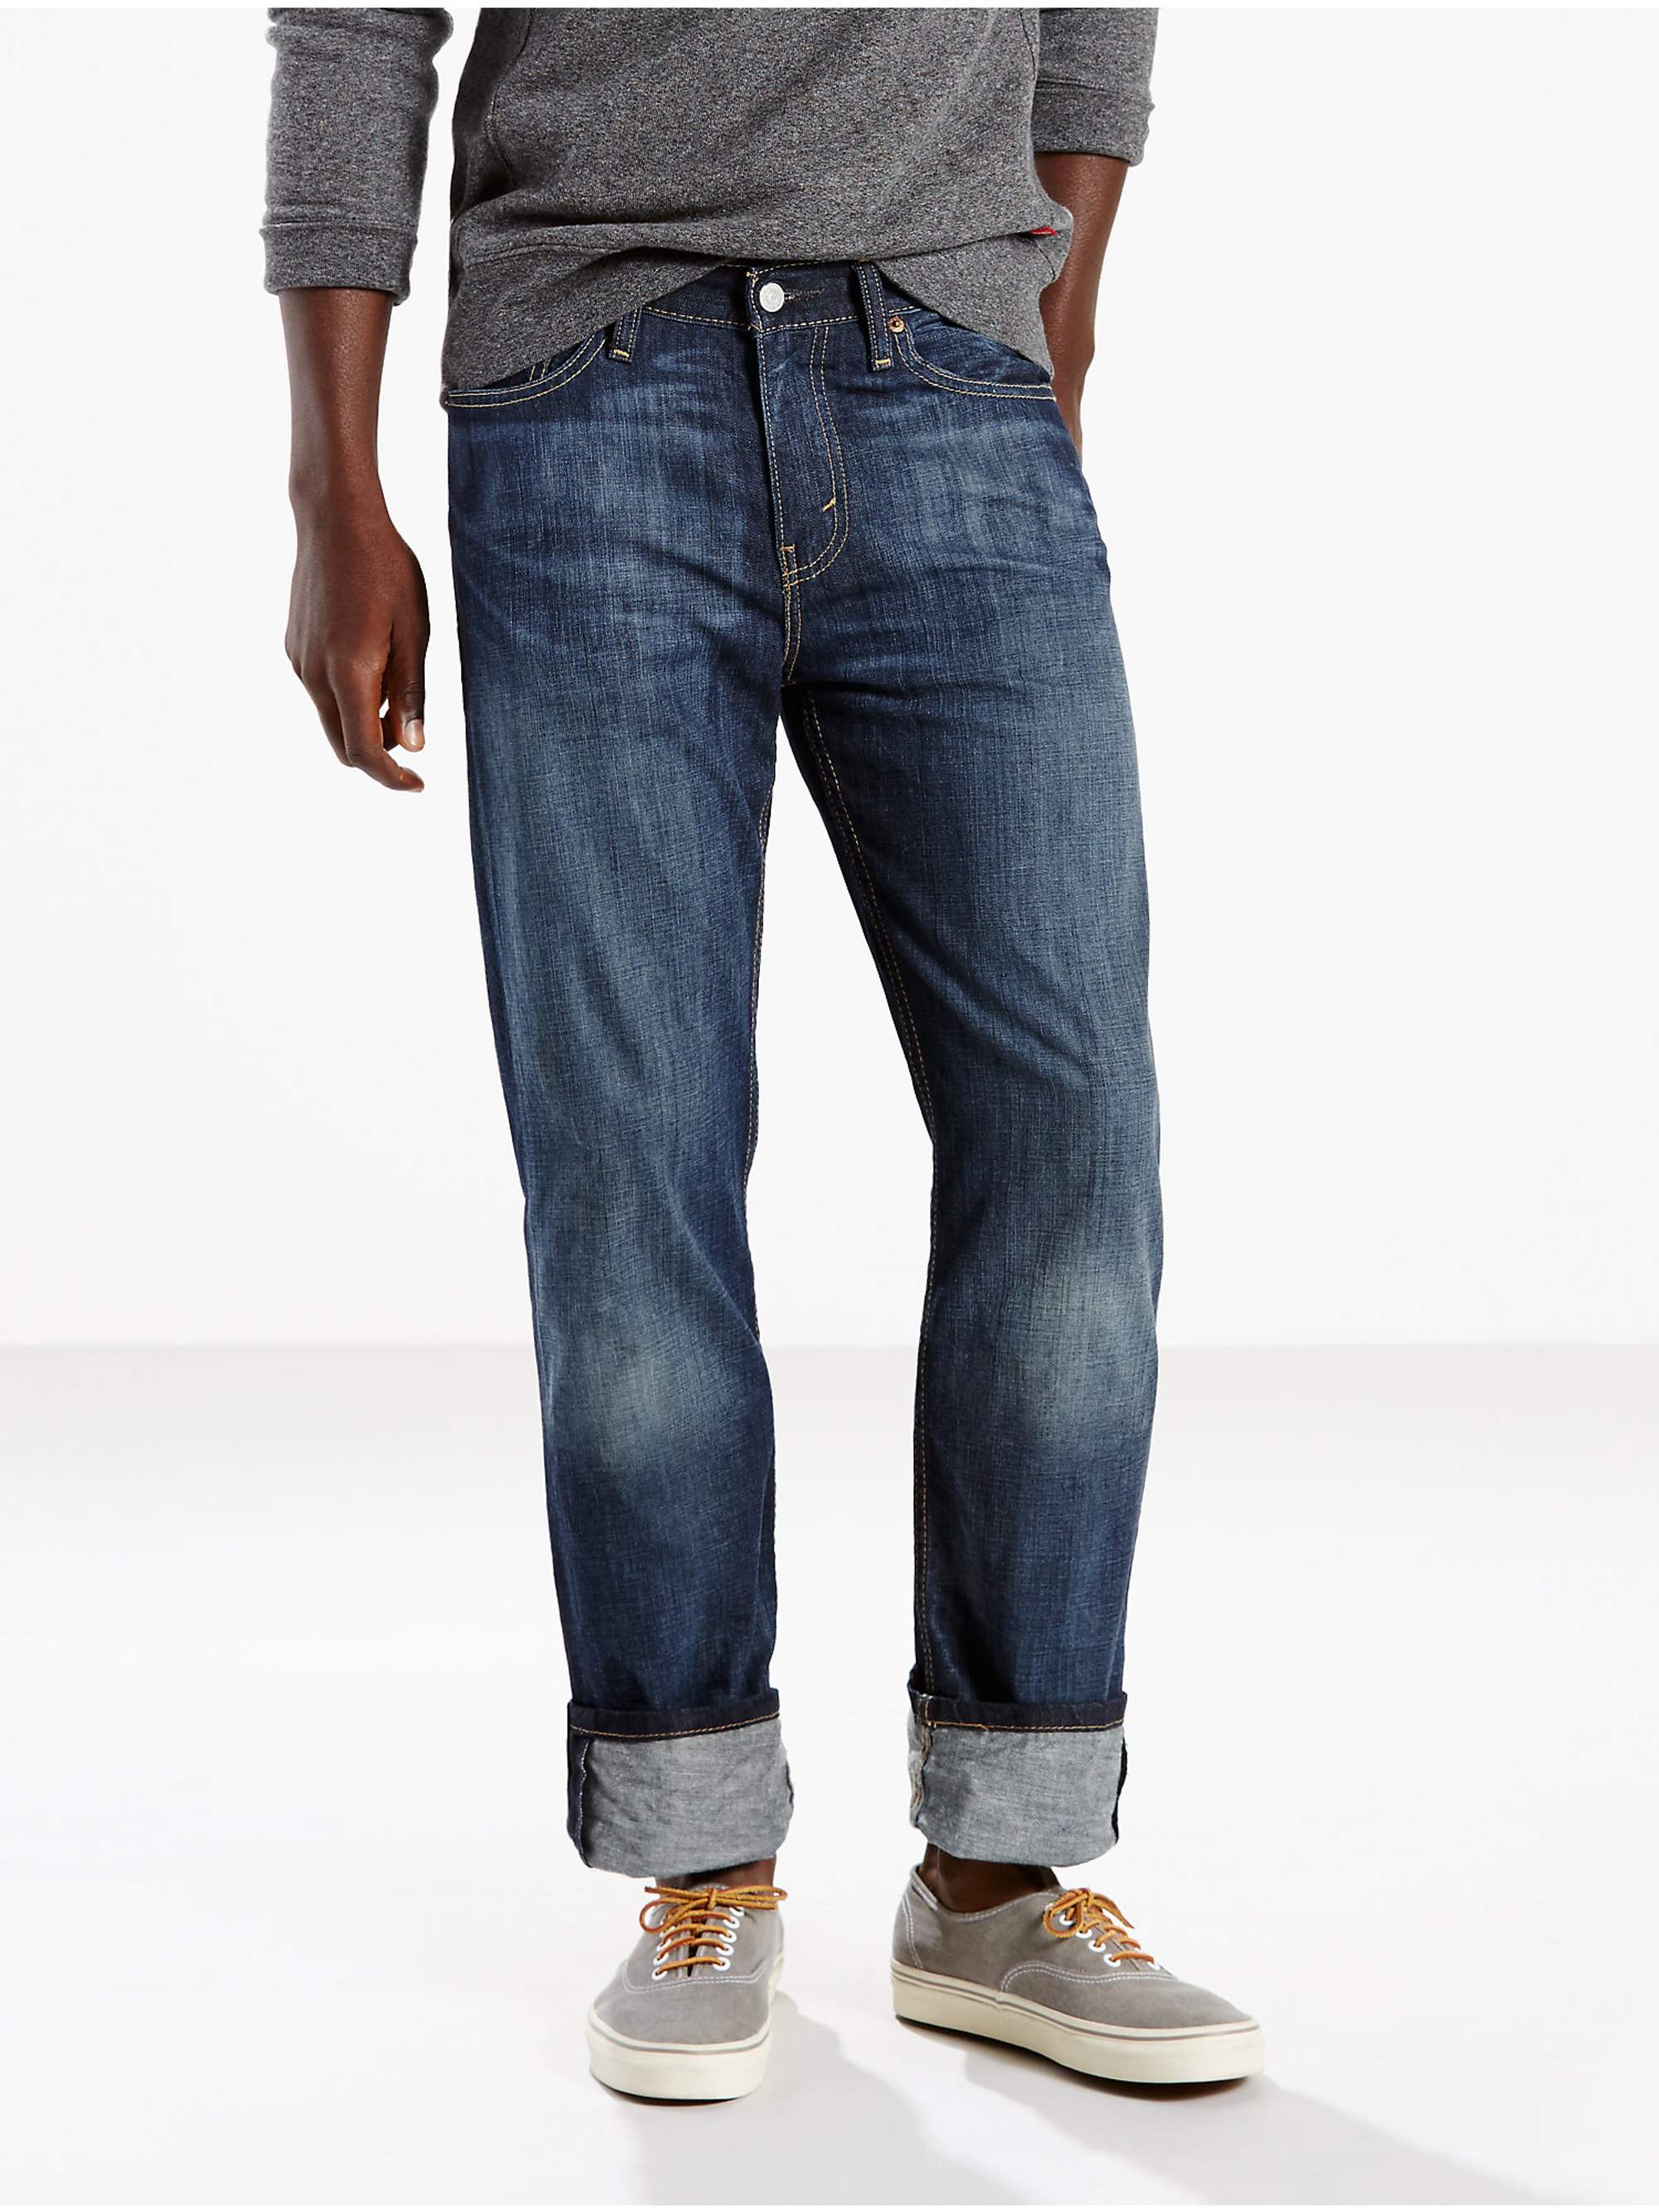 Buy Levis Mens 514 Straight Fit Jeans Online at Lowest Price in Ubuy Qatar.  444224209